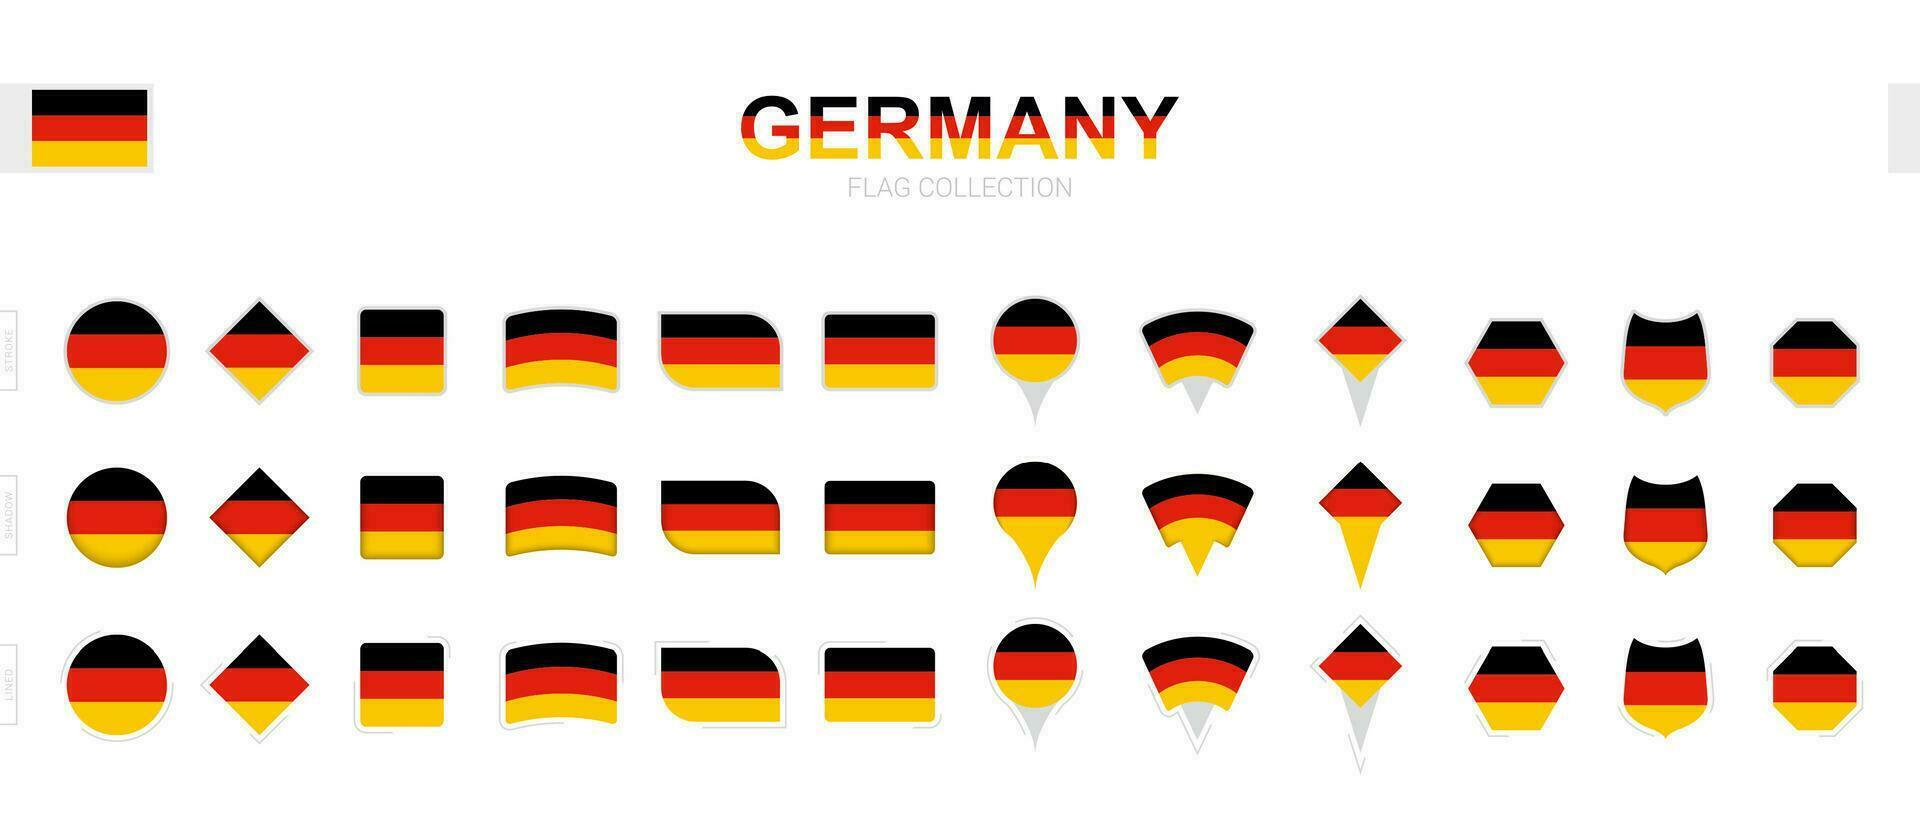 Large collection of Germany flags of various shapes and effects. vector